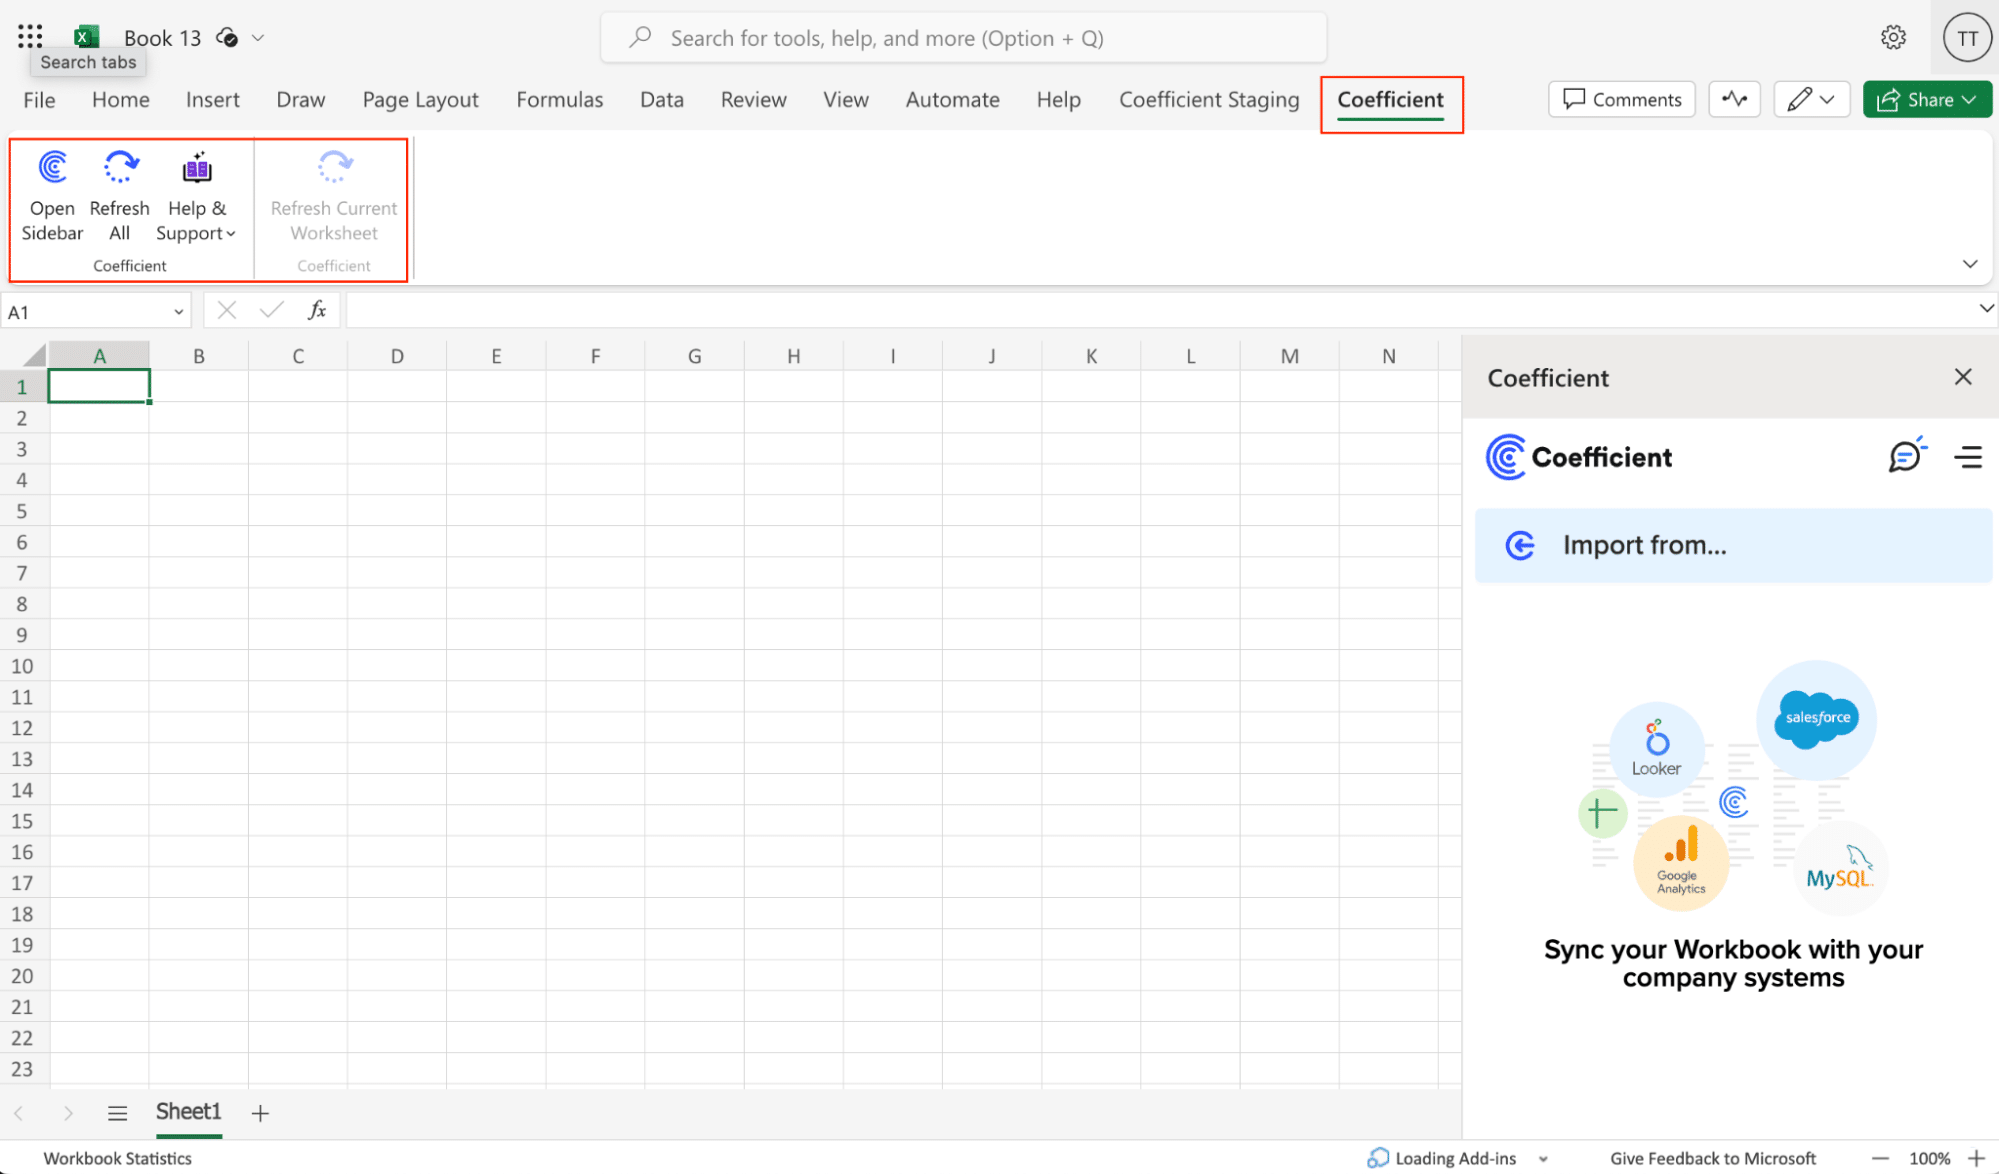 The Open Sidebar button in the Coefficient tab of the Excel ribbon.